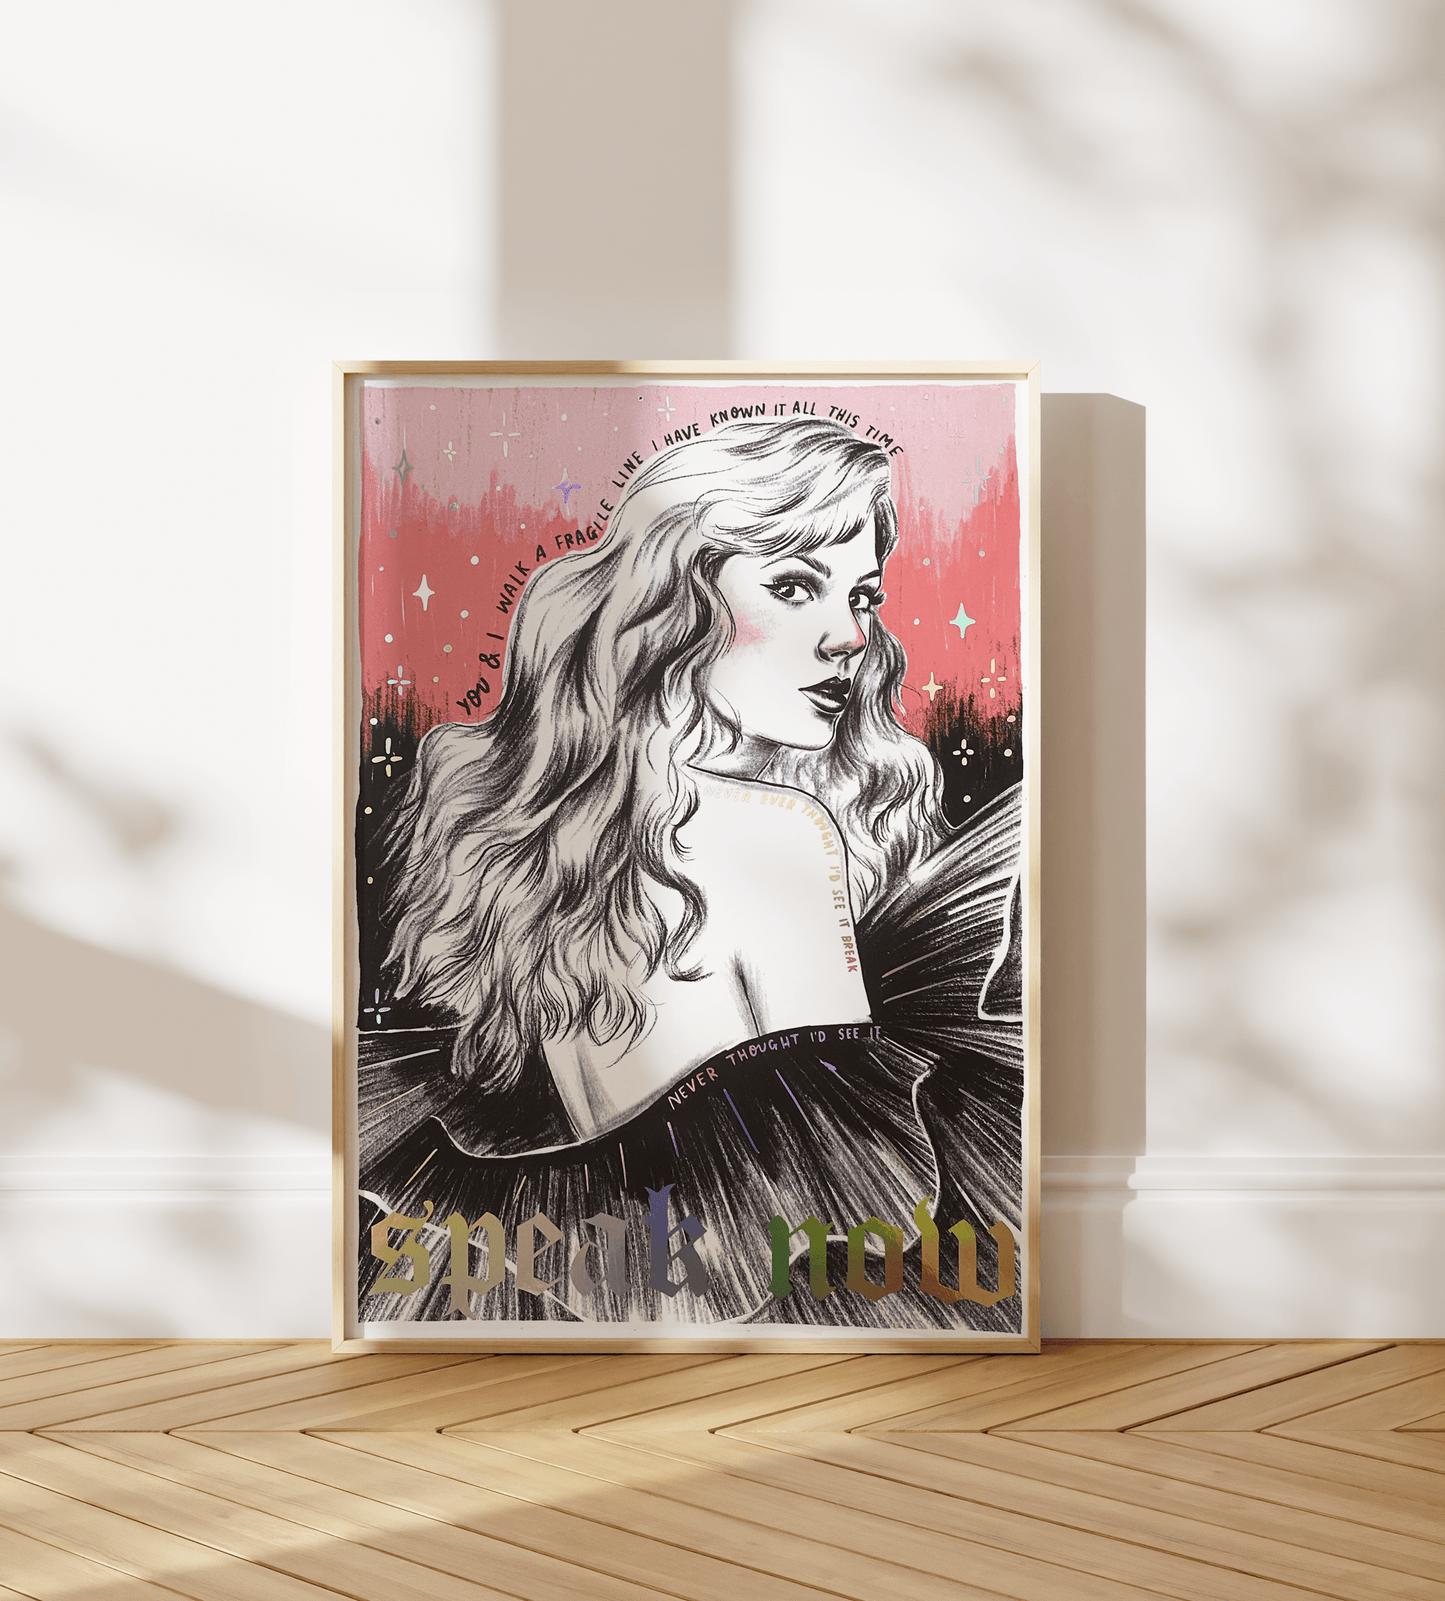 Speak Now - Taylor Swift A4 holographic foiled print